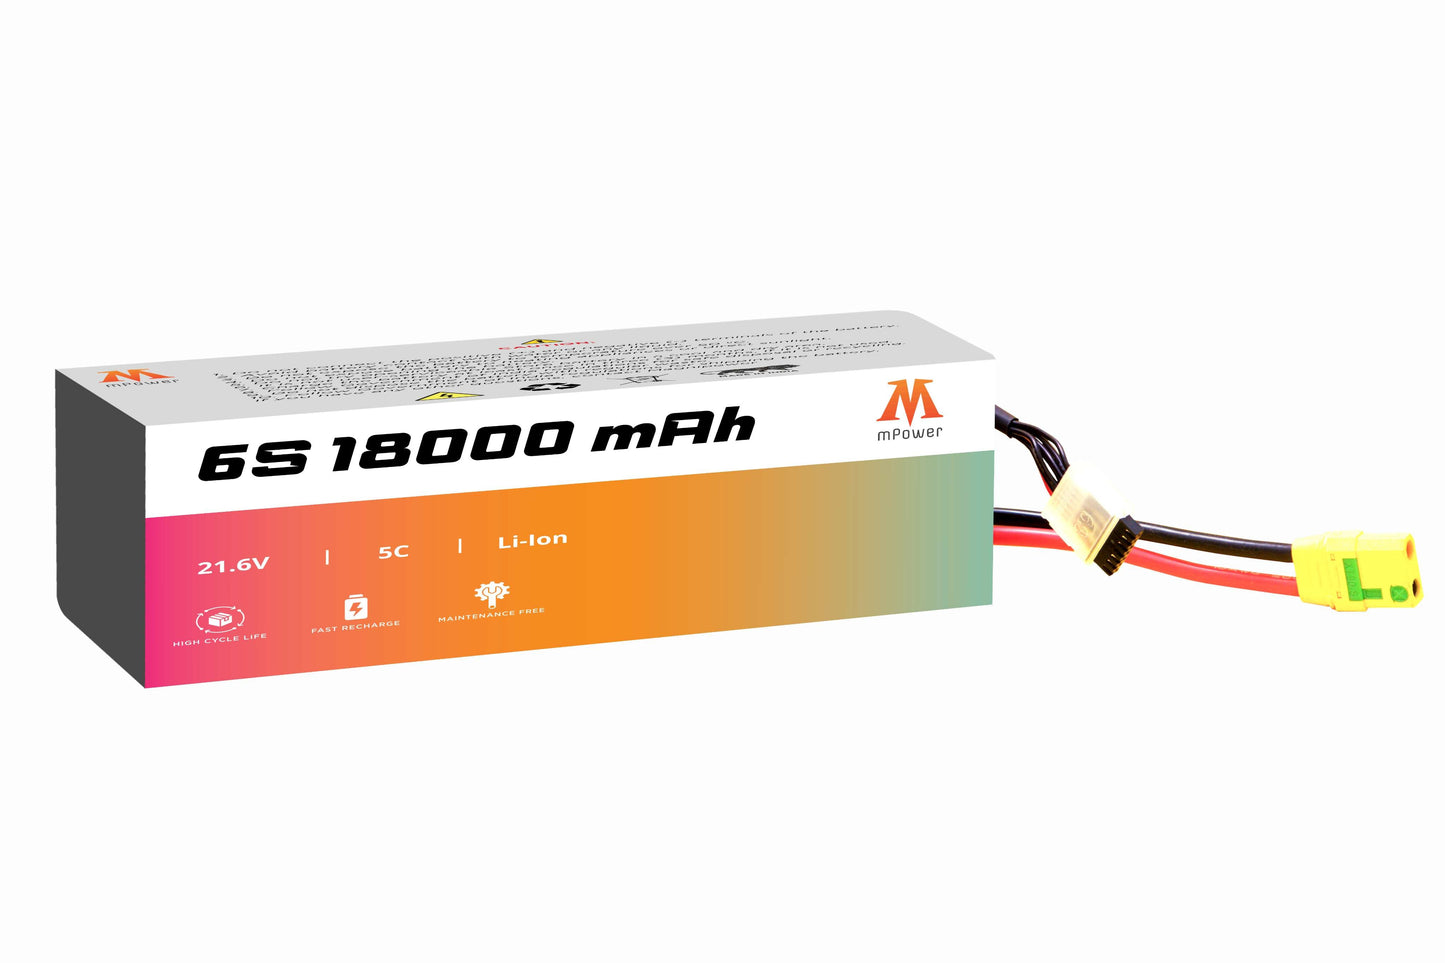 mPower 6S 18000mAh Lithium-Ion Battery for Surveillance Drones